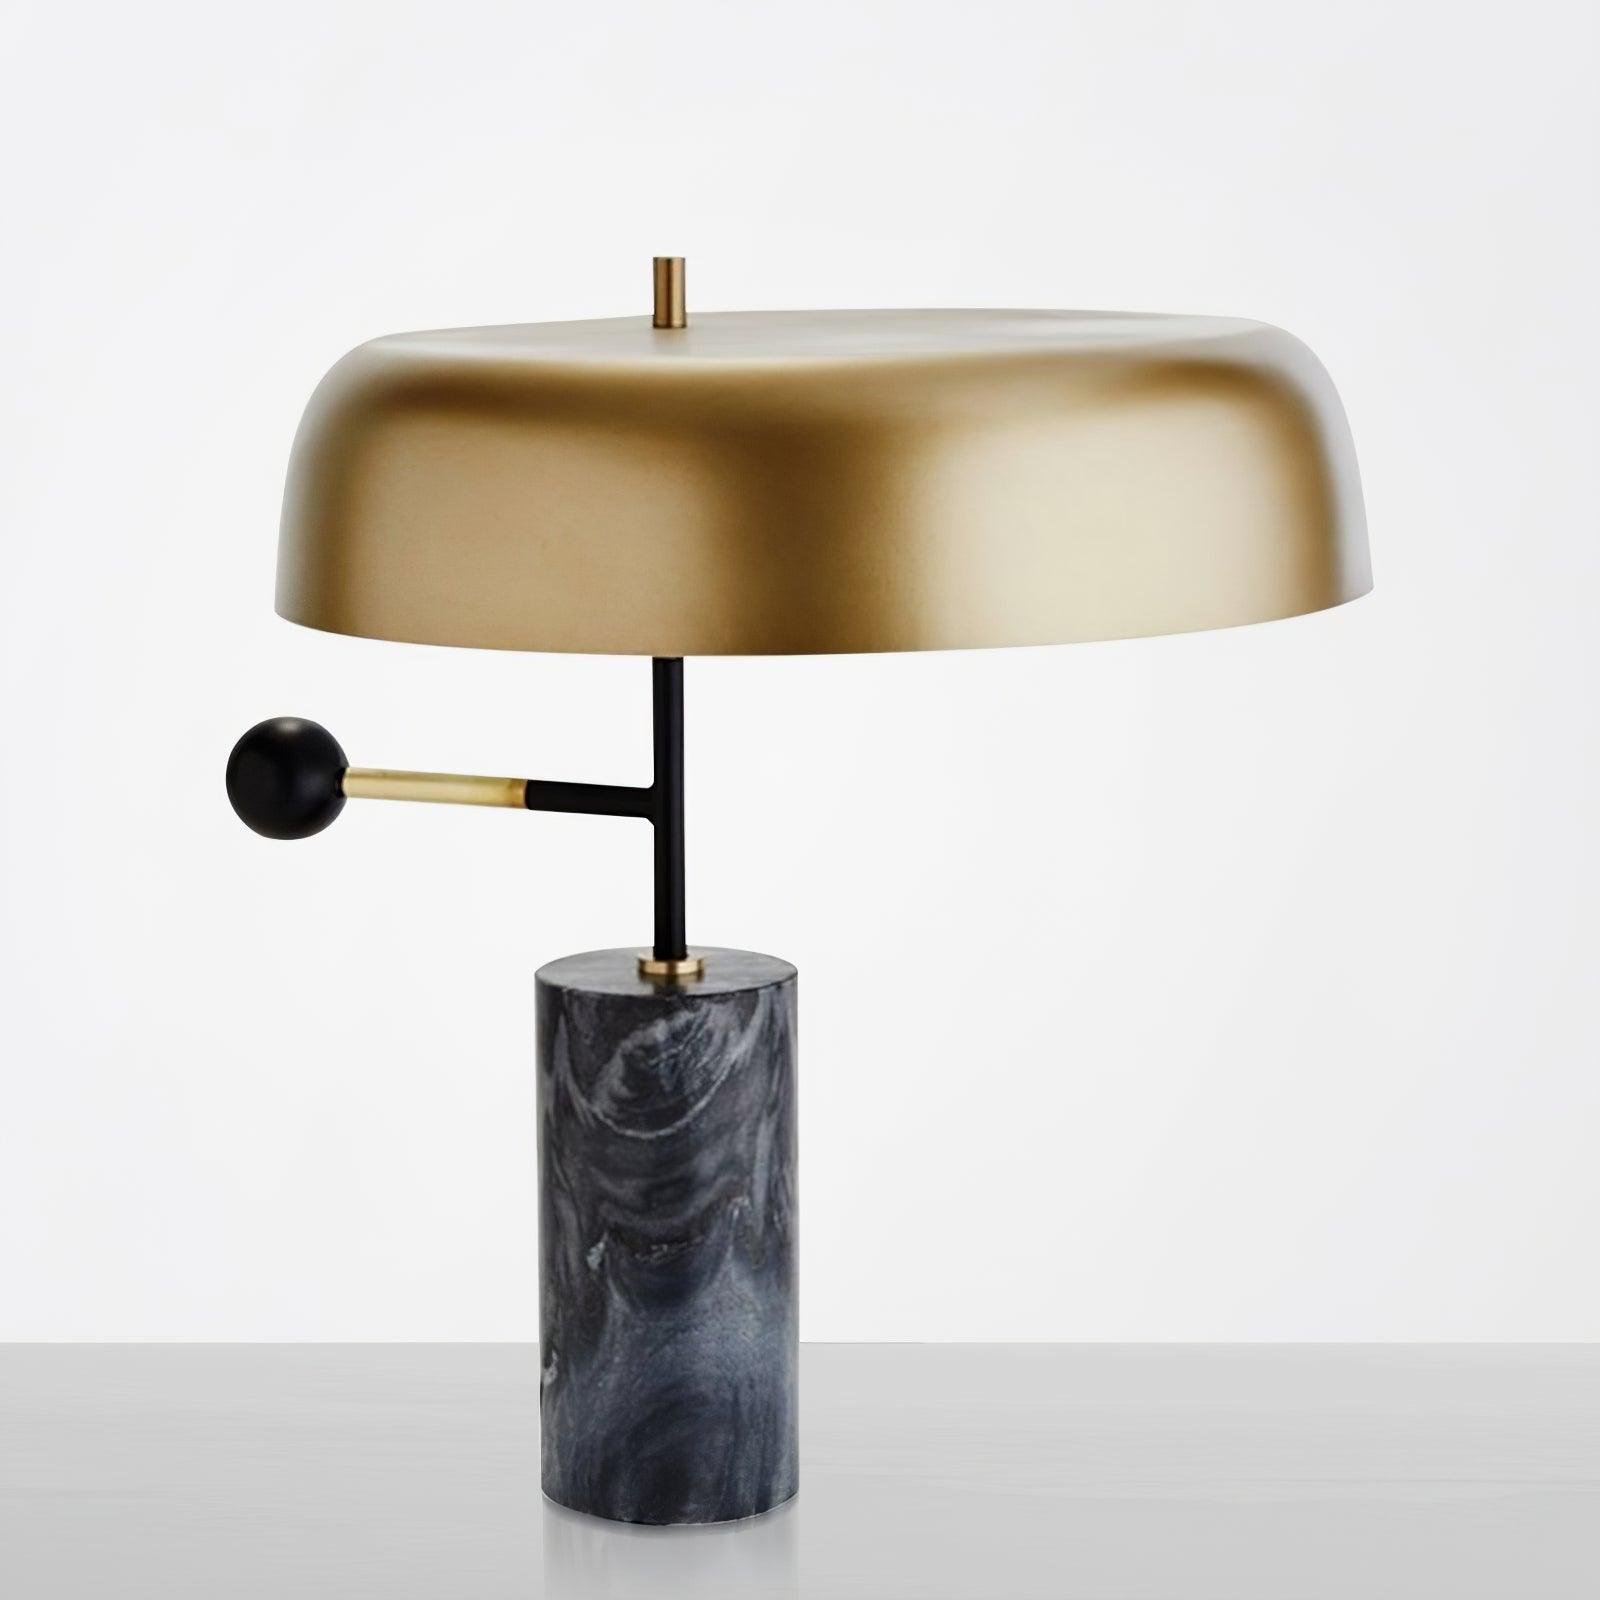 Adam Table Light in Black and Gold with UK Plug, Dimensions ∅ 13.8″ x H 17.7″ (Dia 35cm x H 45cm)